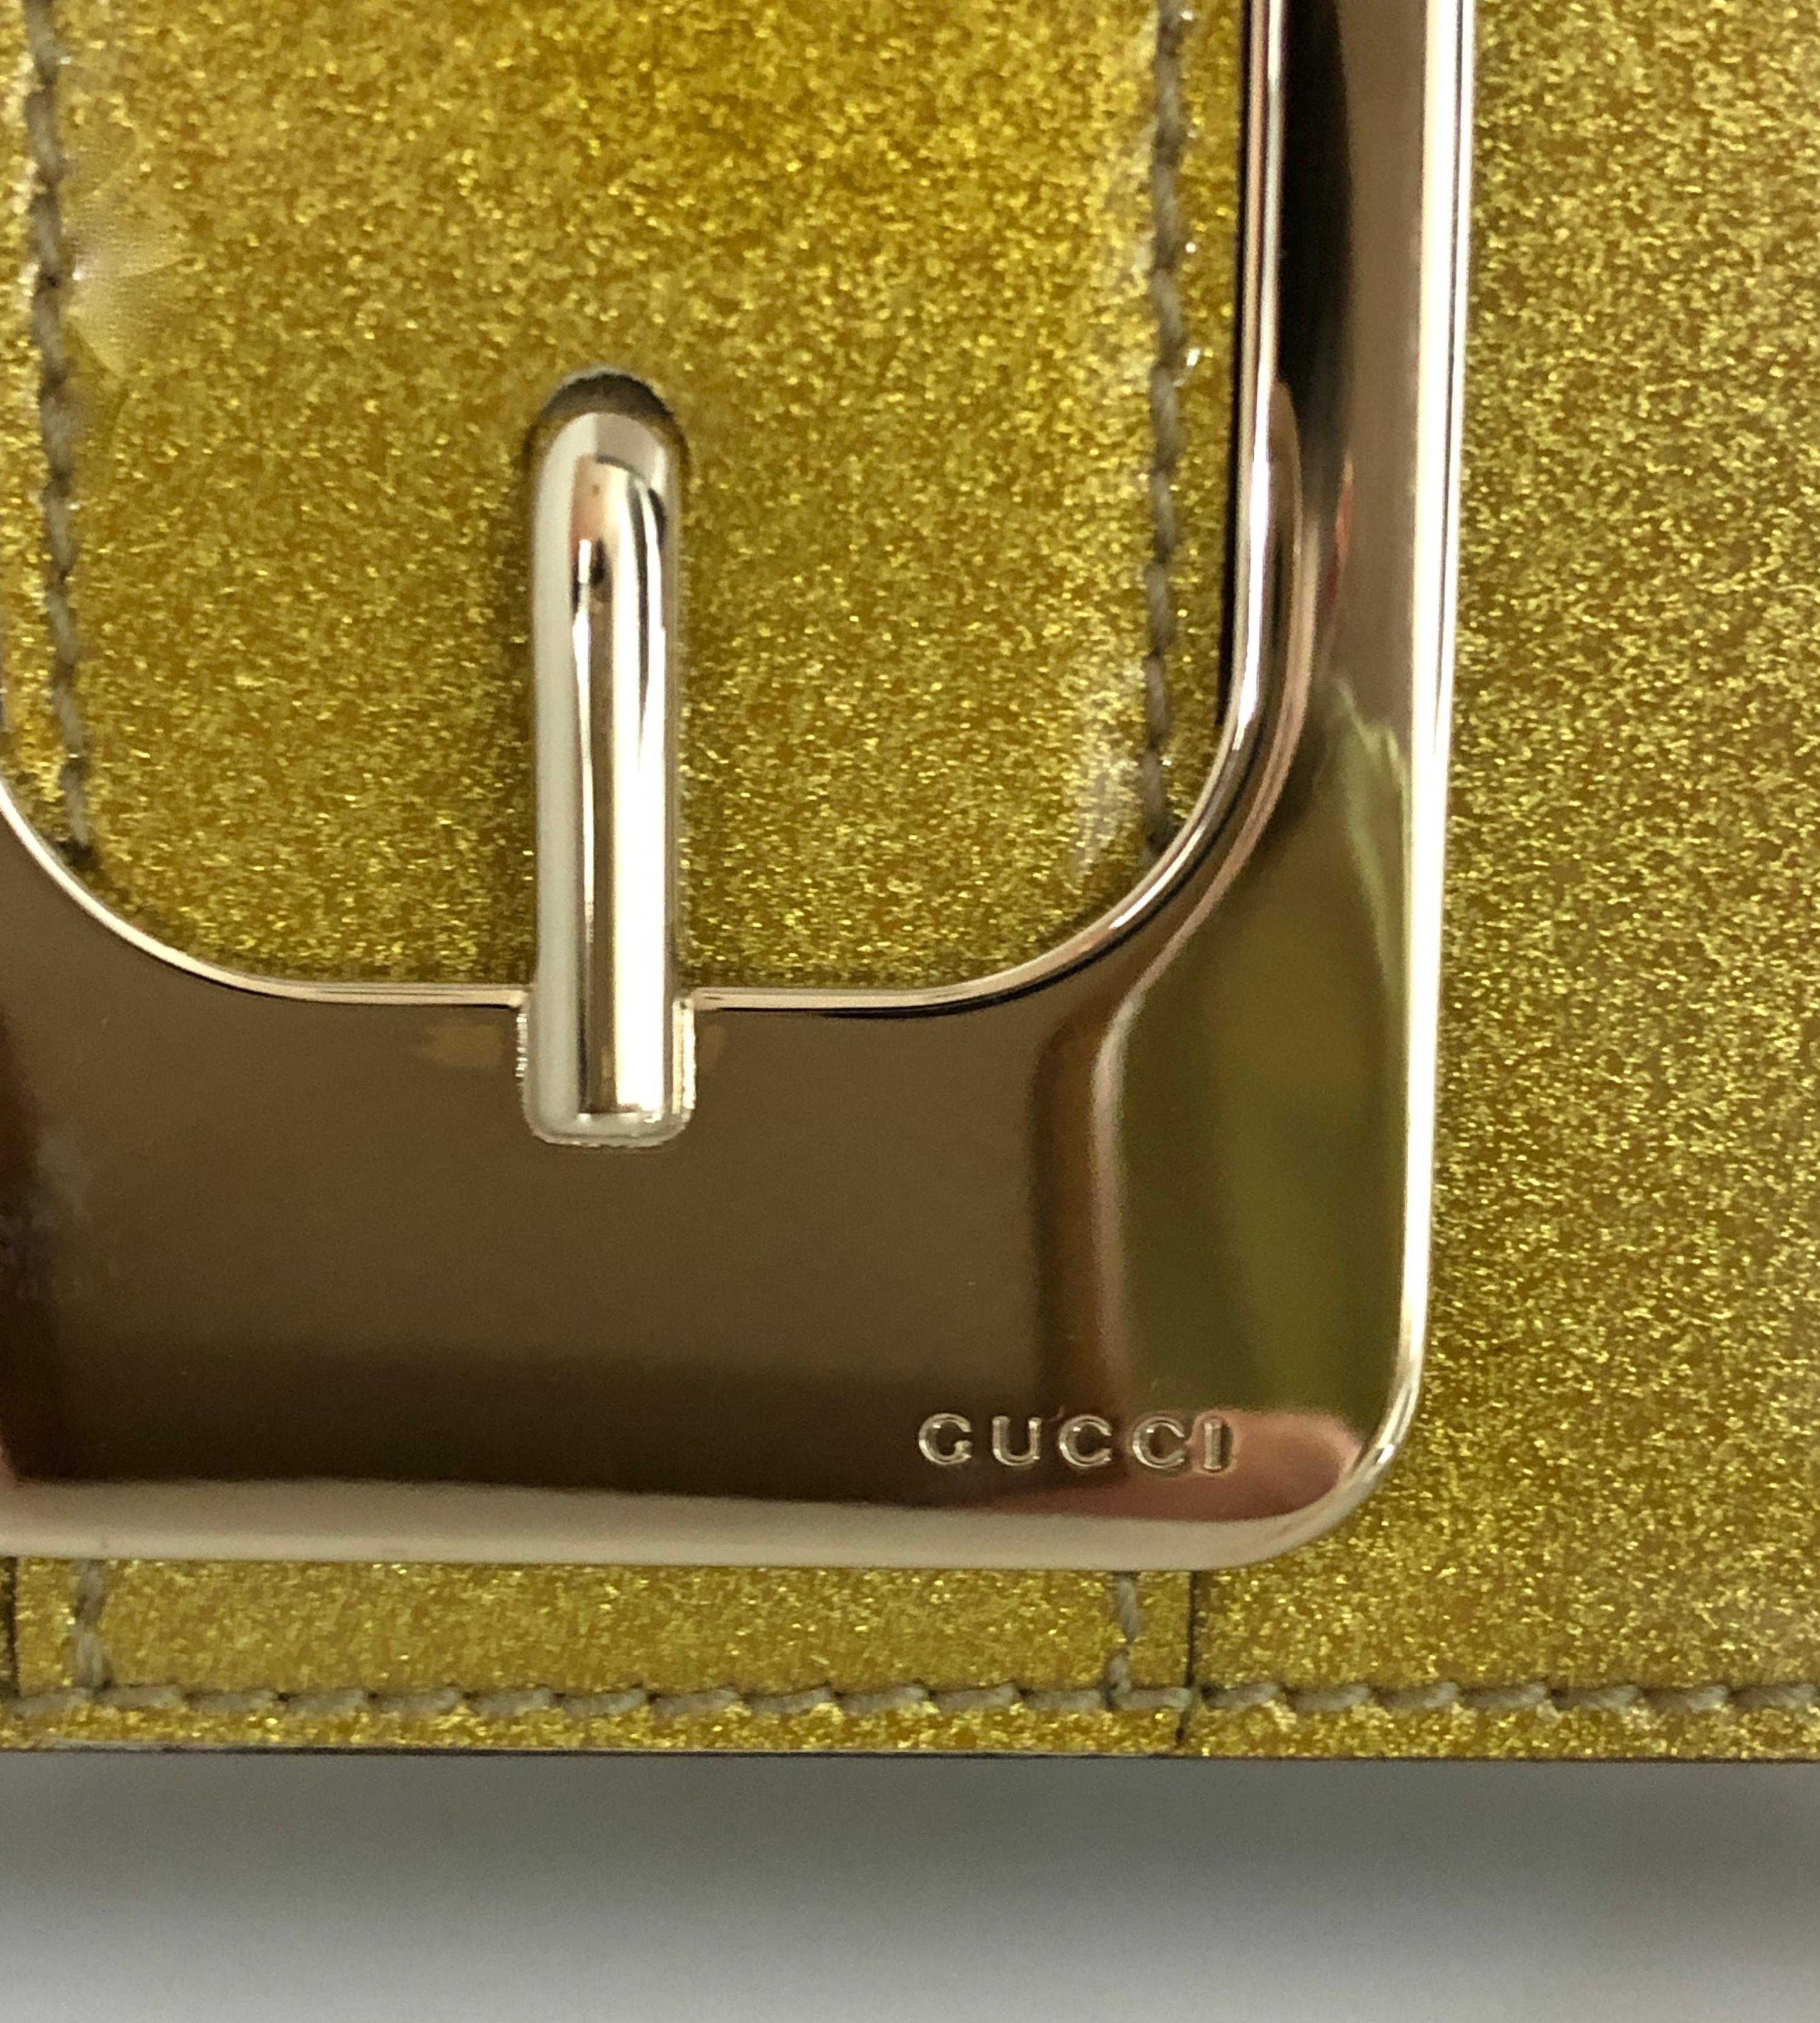 Gucci Iridescent Gold Patent Leather Elongated Clutch with Gold Metal Accents For Sale 6